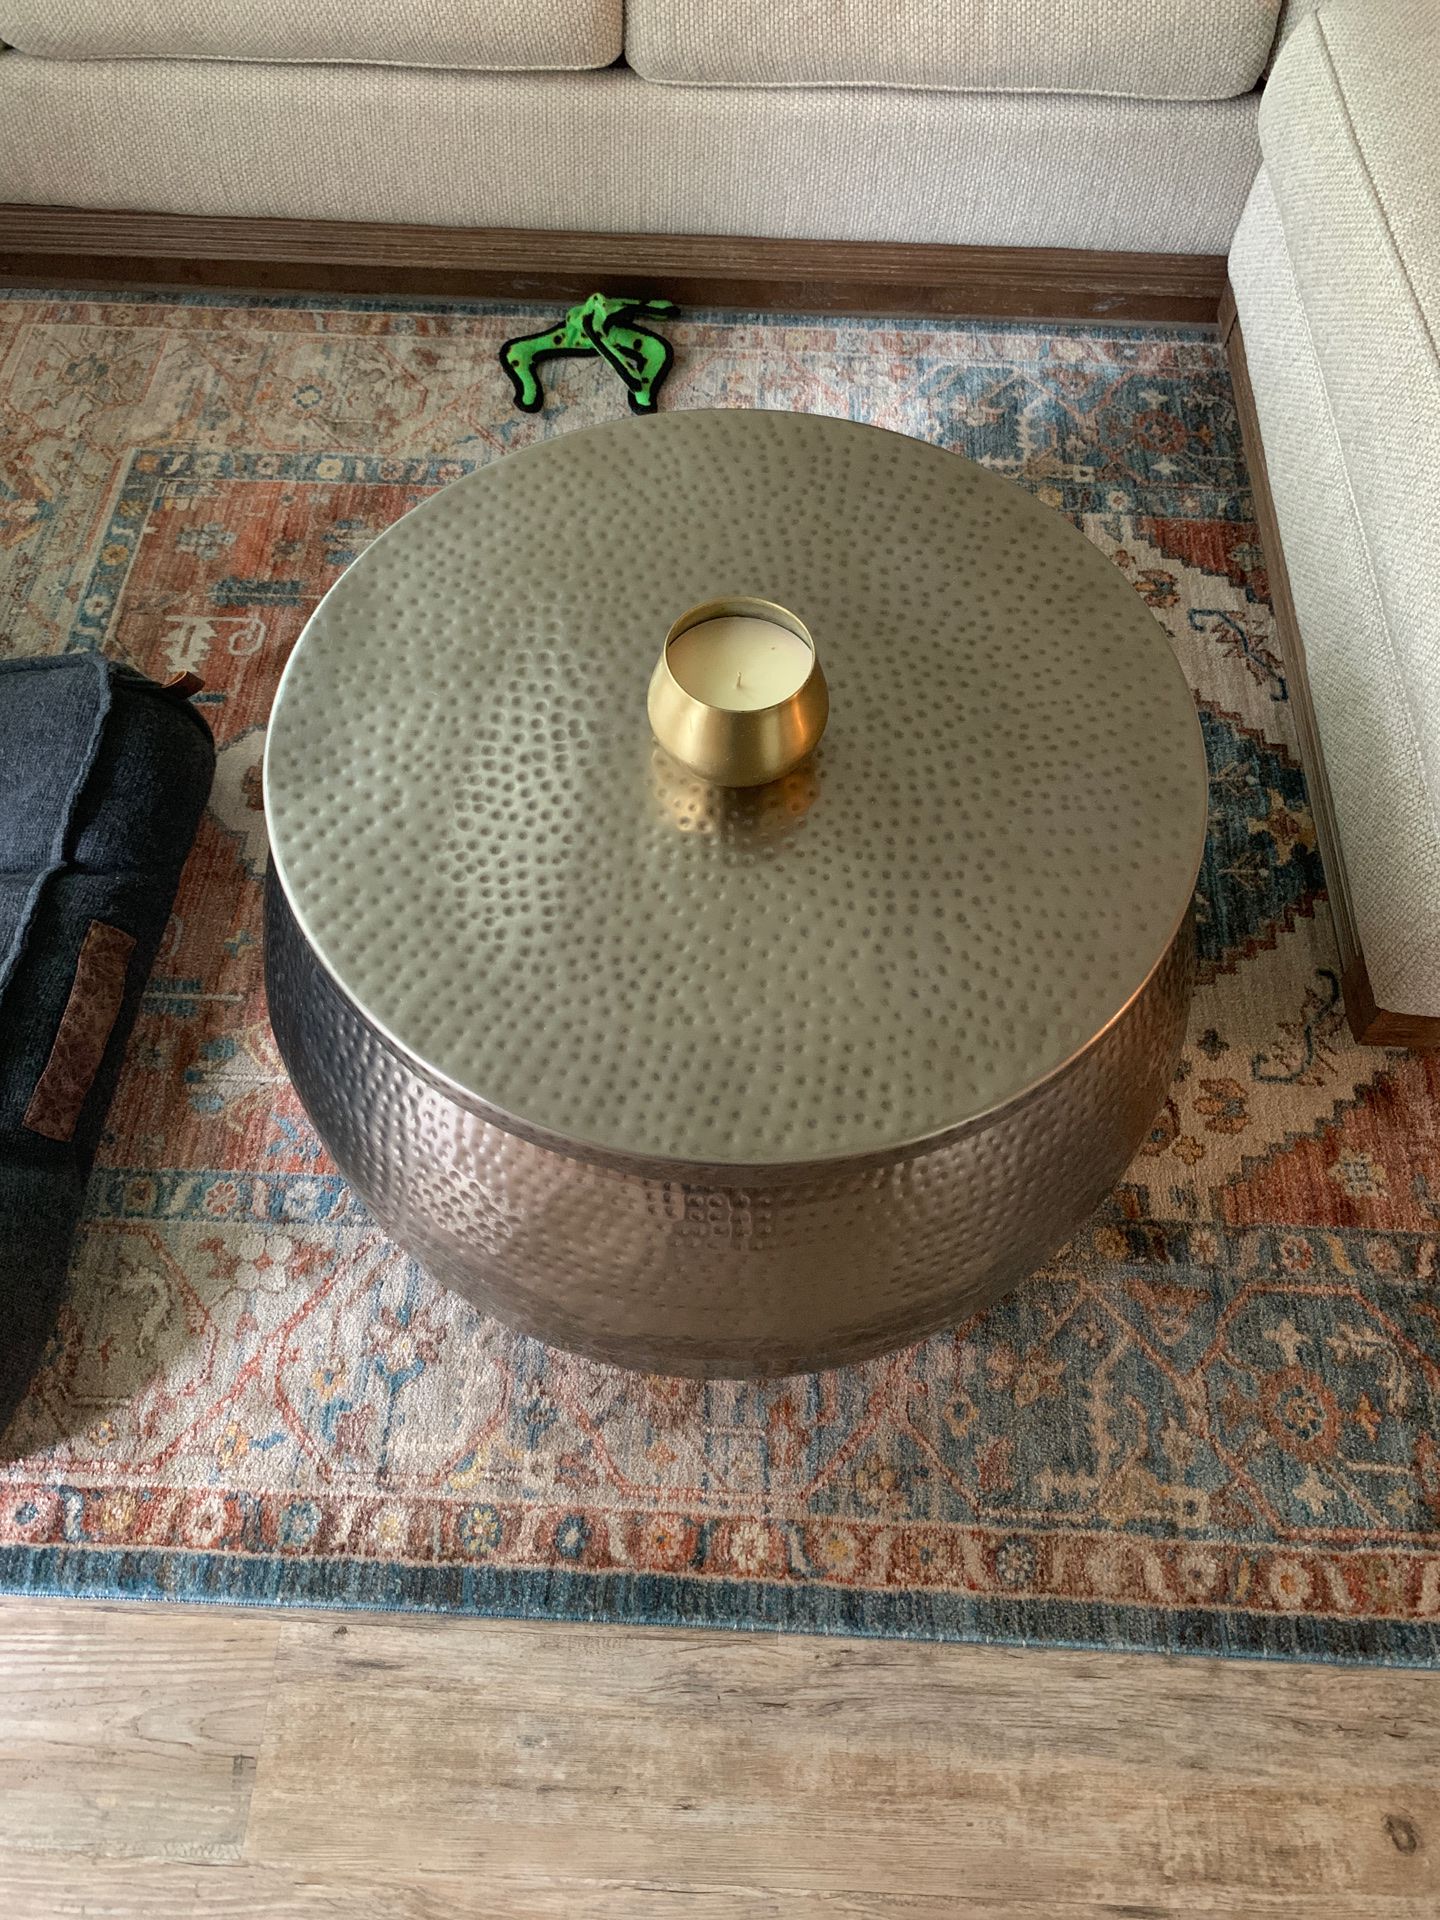 World Market Coffee Table - Need to sell ASAP